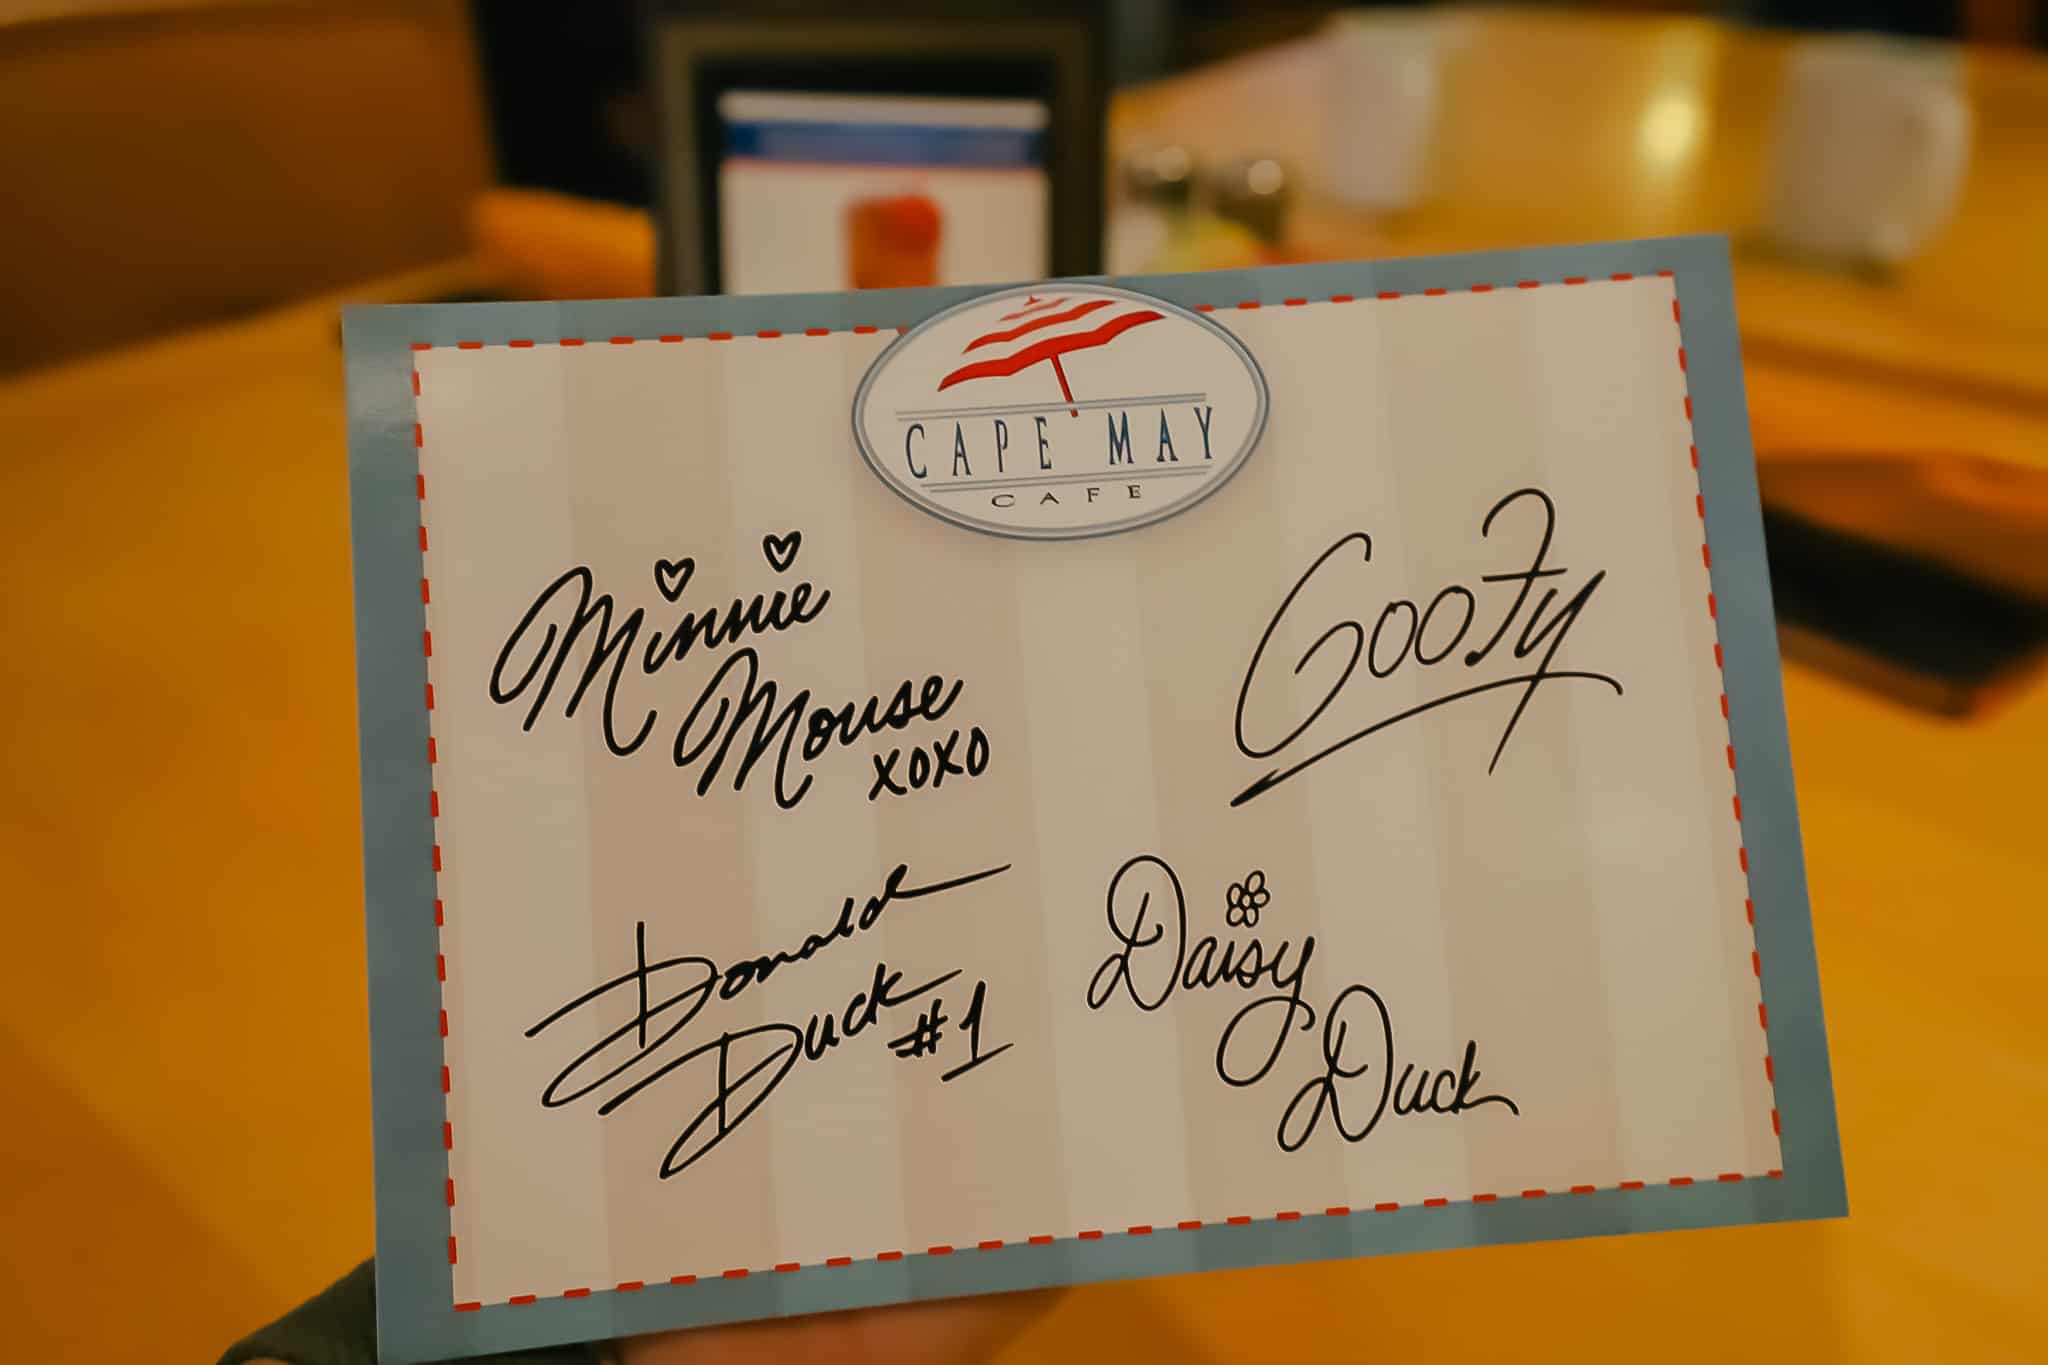 Characters autographs at Cape May Cafe